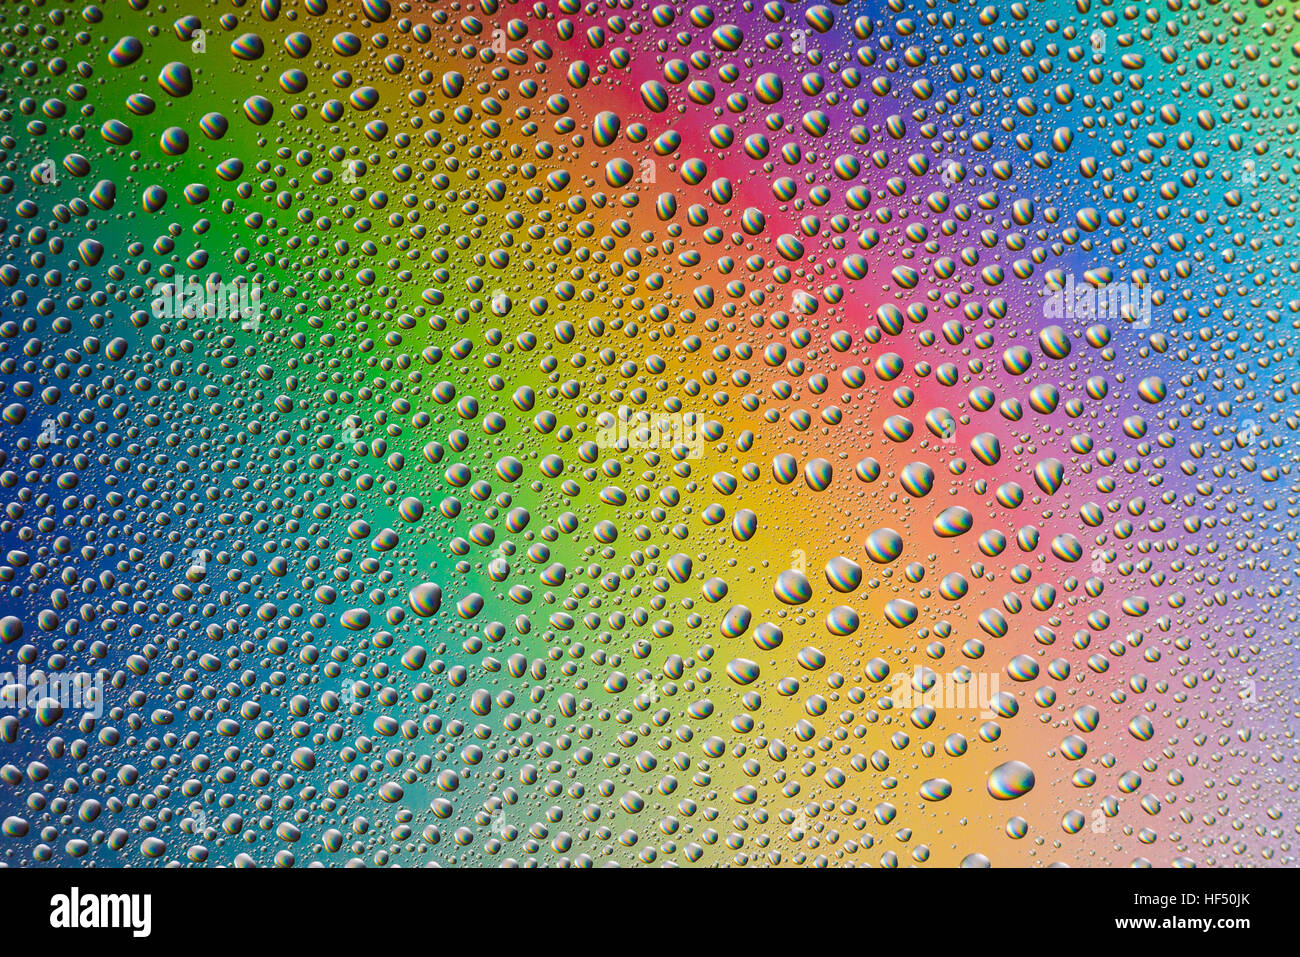 misted glass, the drops closeup on rainbow colored background Stock Photo